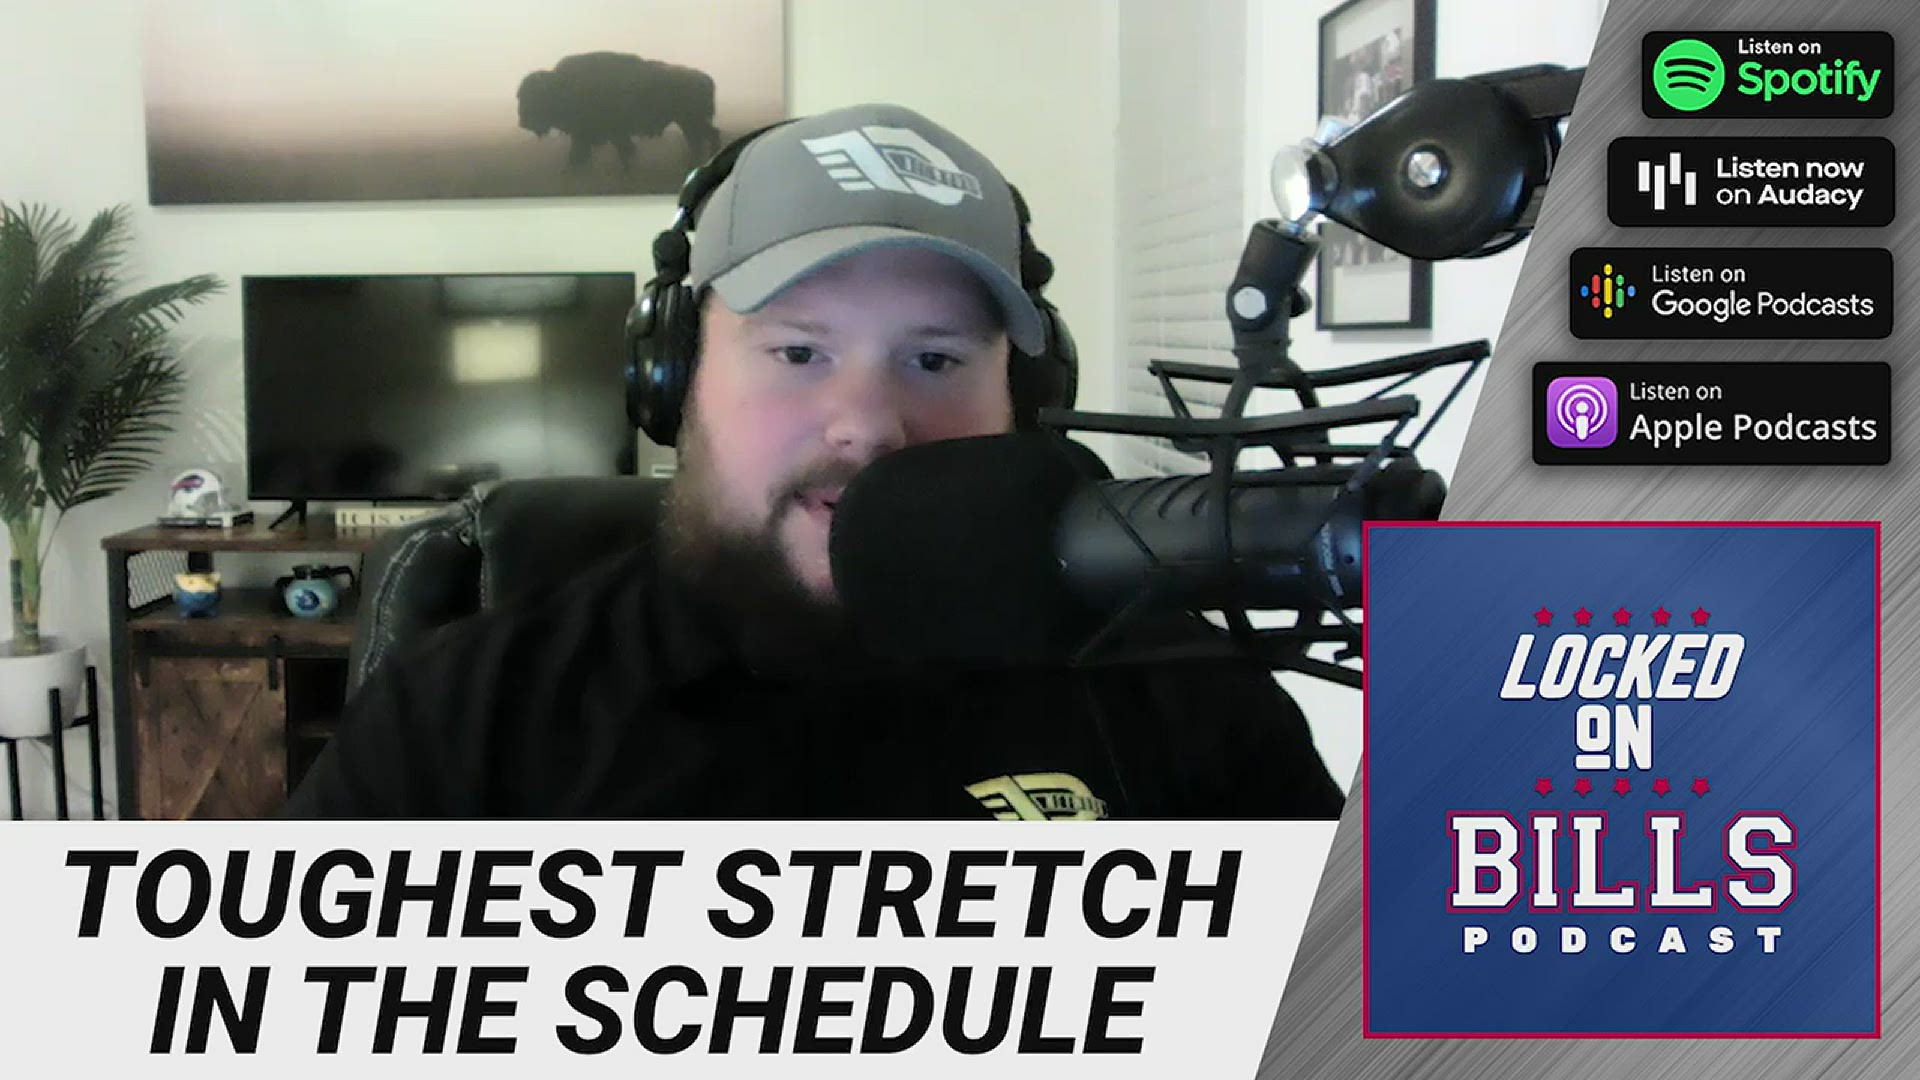 What's the toughest stretch in the schedule for the Bills? Locked On has some thoughts.